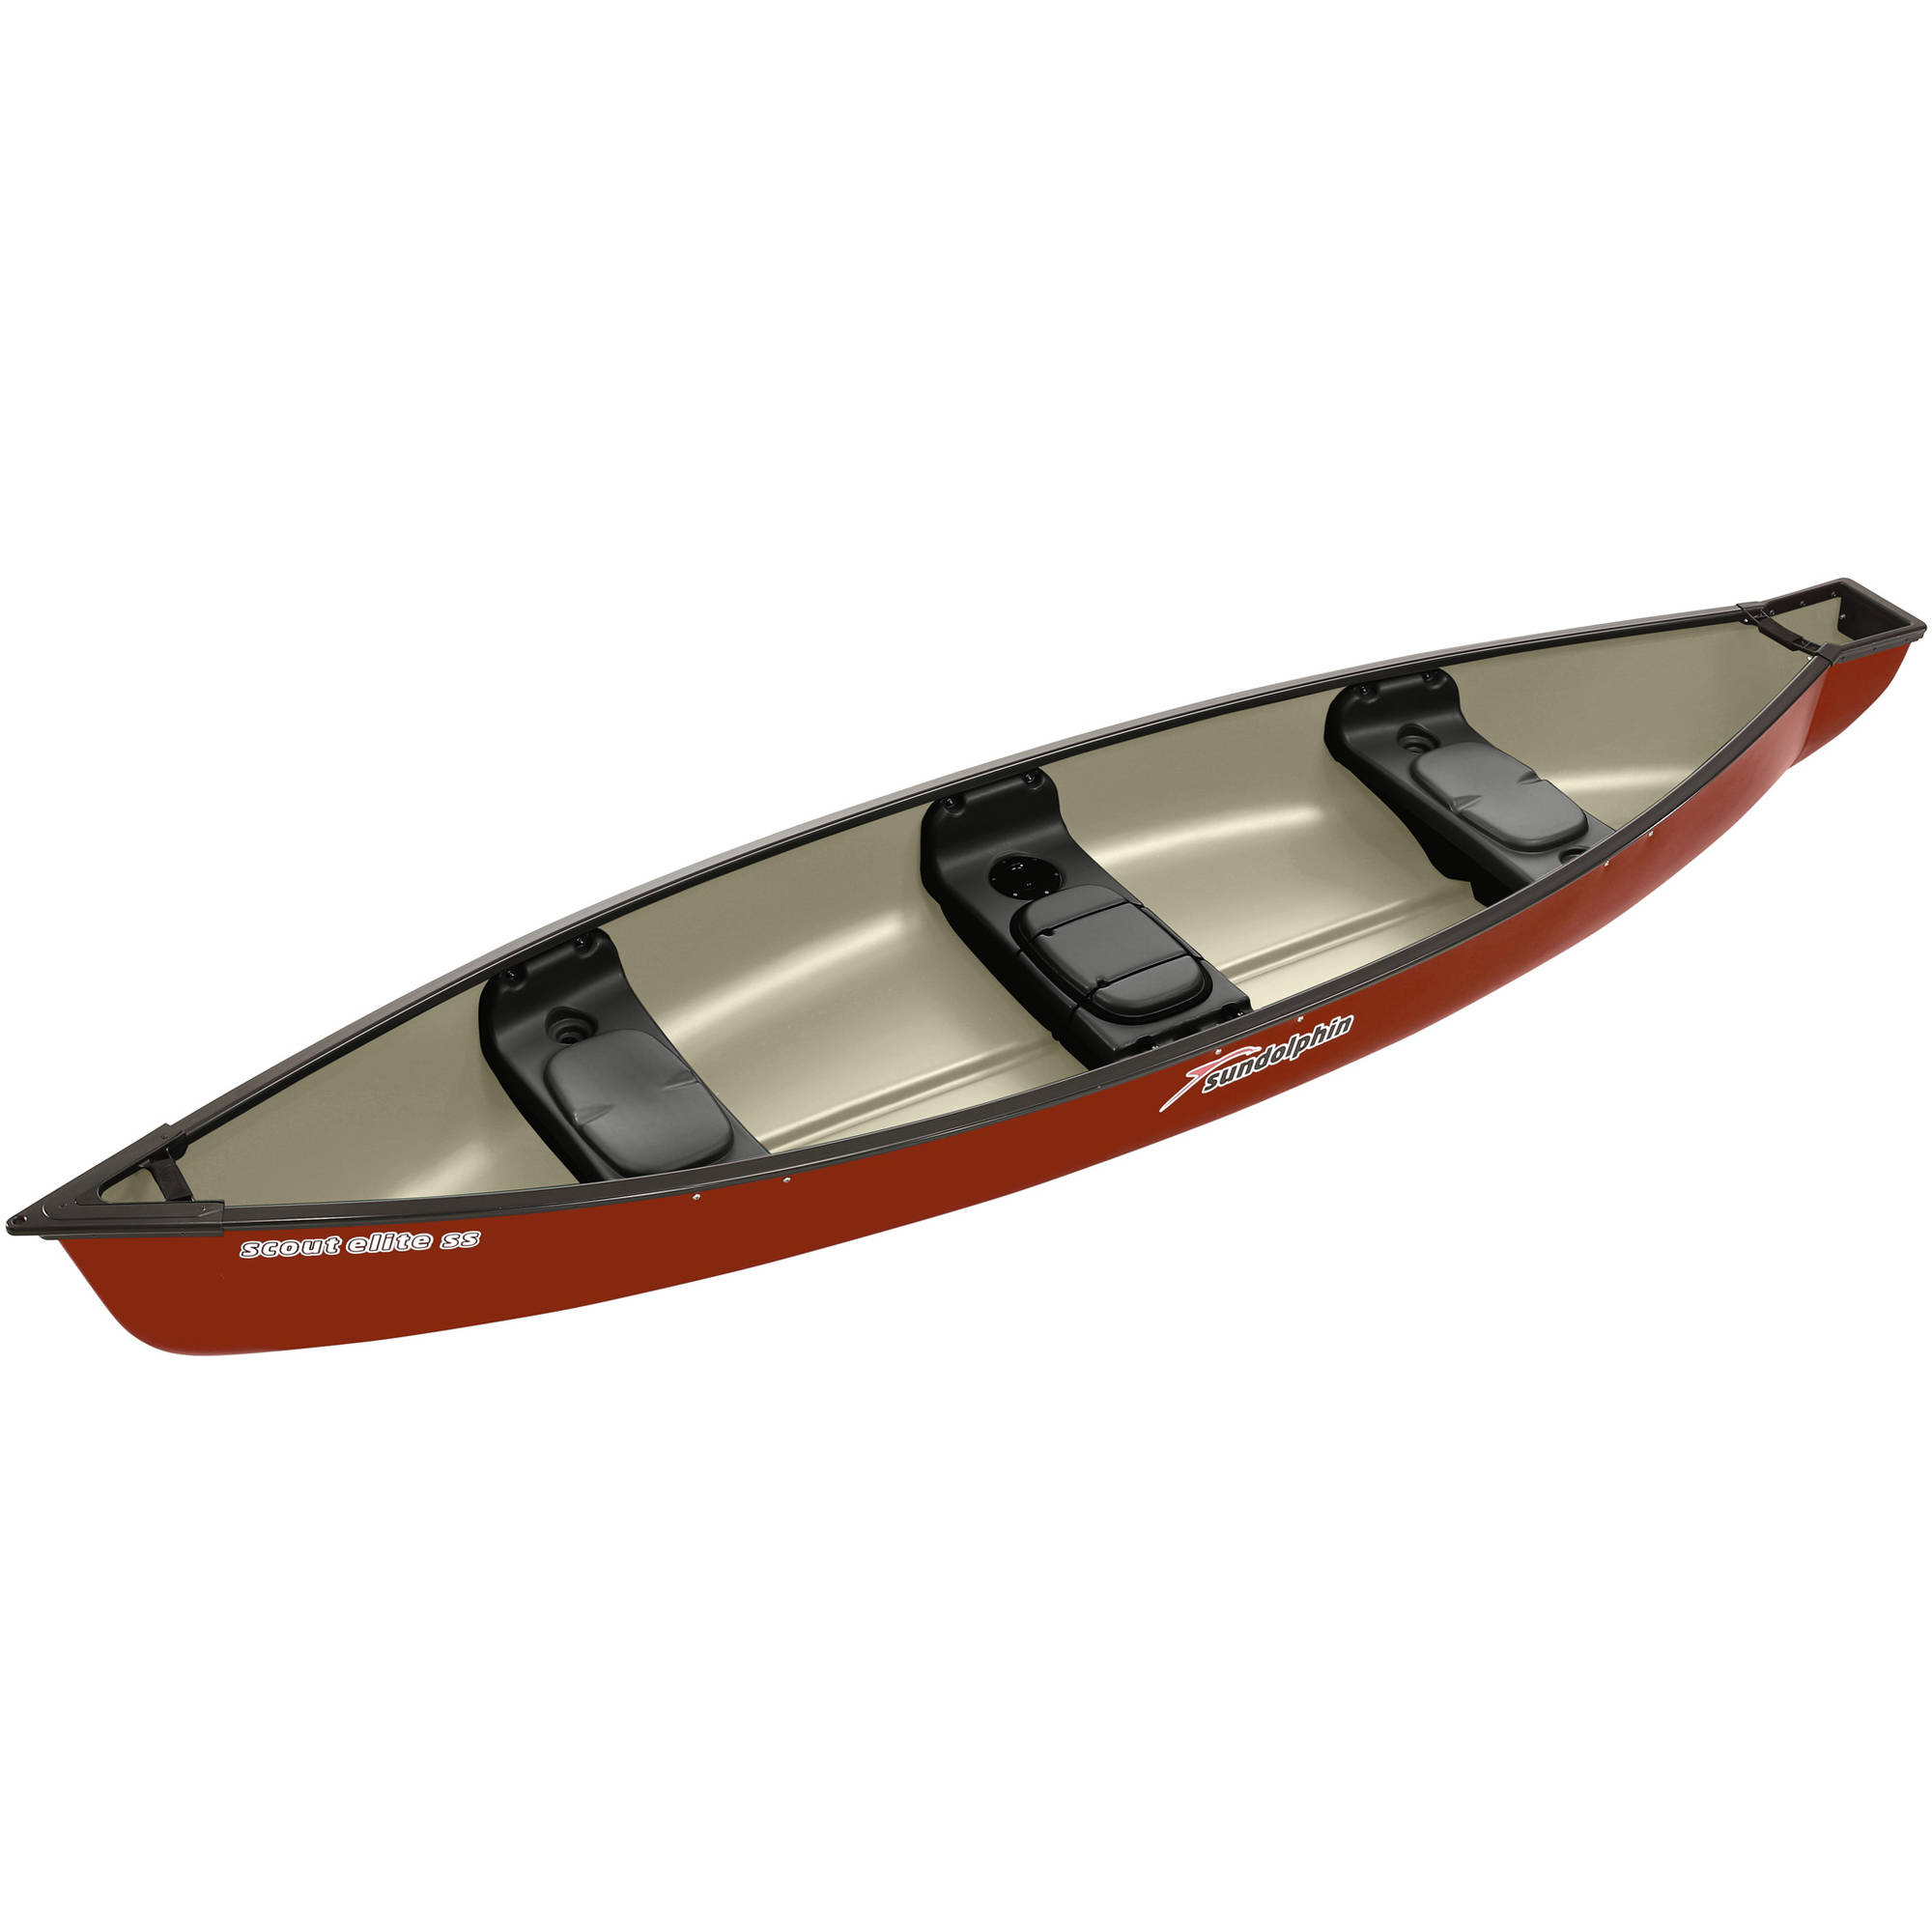 Sun Dolphin Scout Elite 14' Square Stern Canoe - image 1 of 5